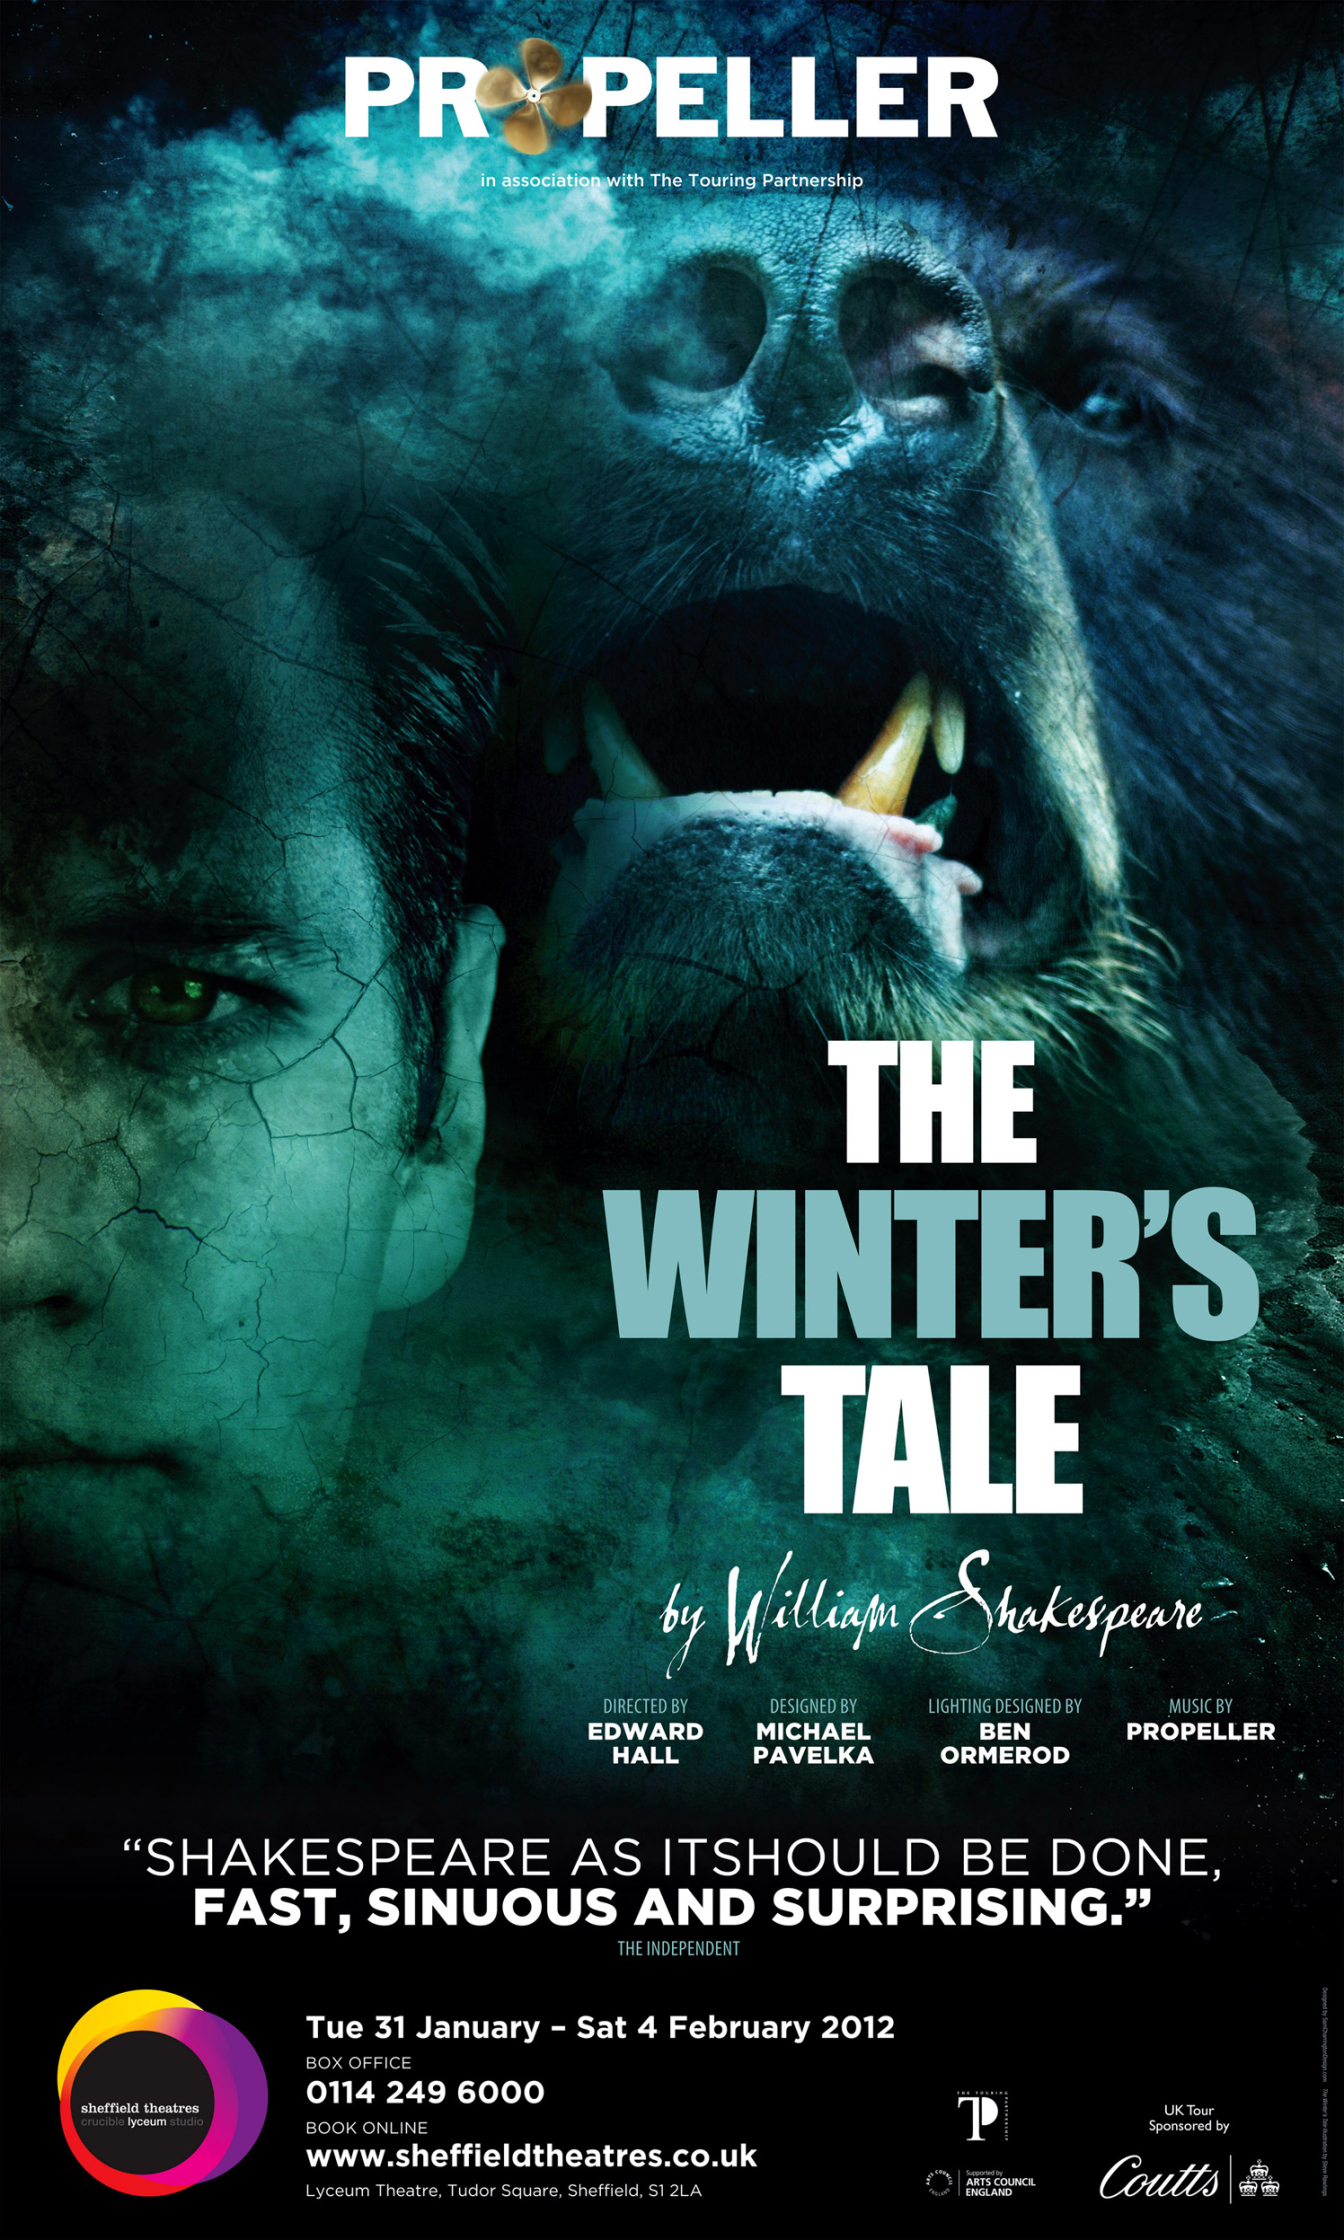 The Winters Tale by William Shakespeare / Propeller Theatre Company